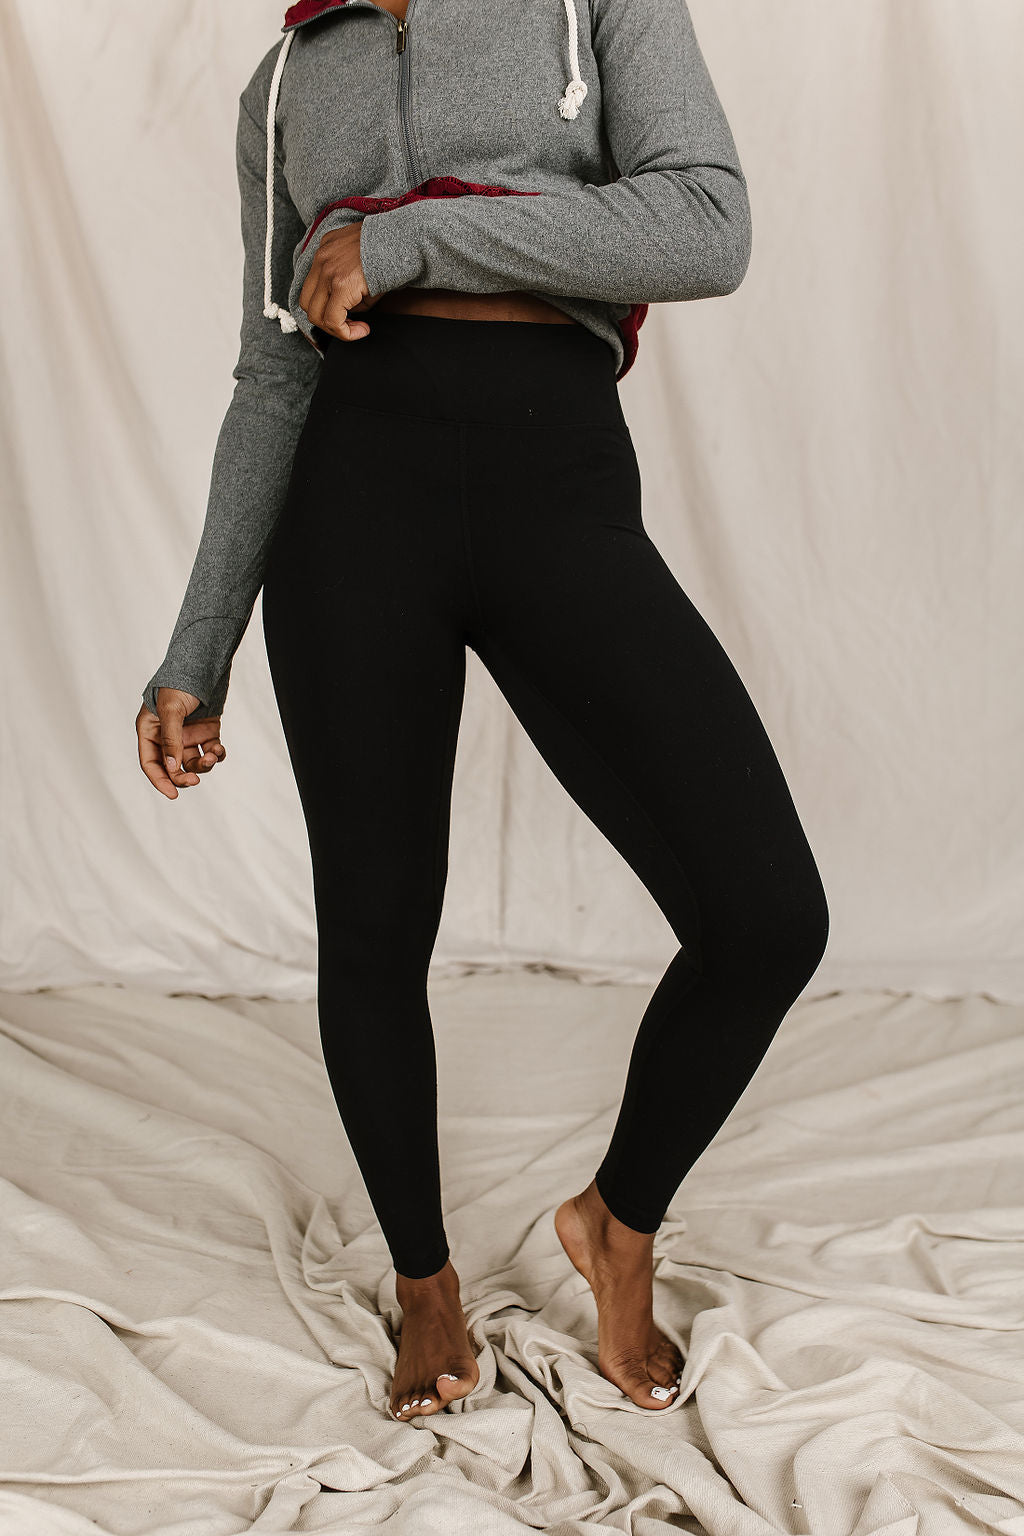 Clothing & Shoes - Bottoms - Leggings - Yummie® Signature